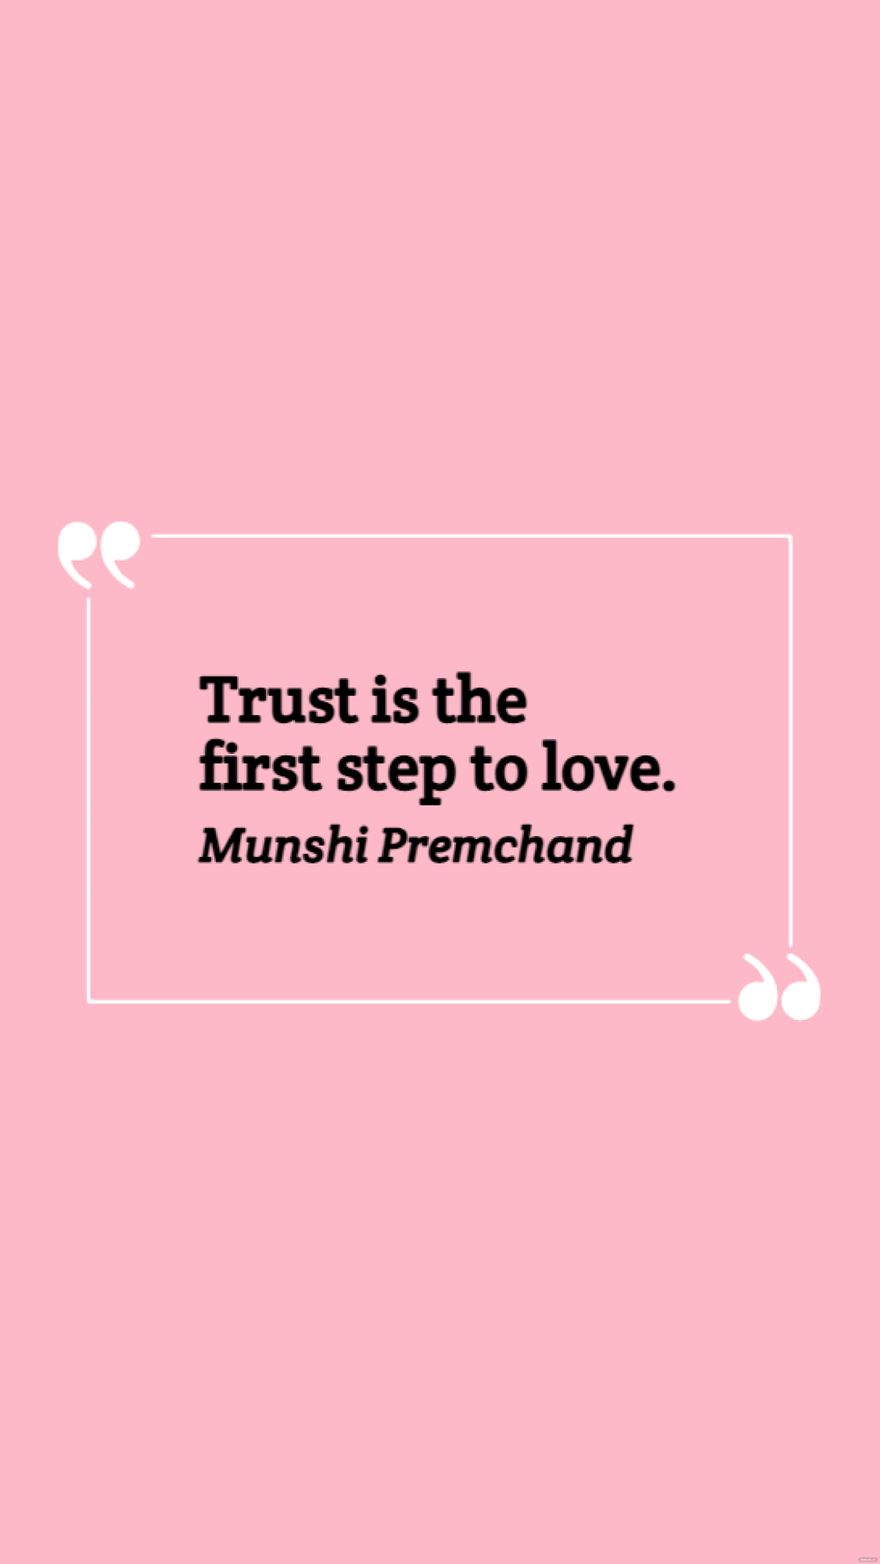 Munshi Premchand - Trust is the first step to love. in JPG